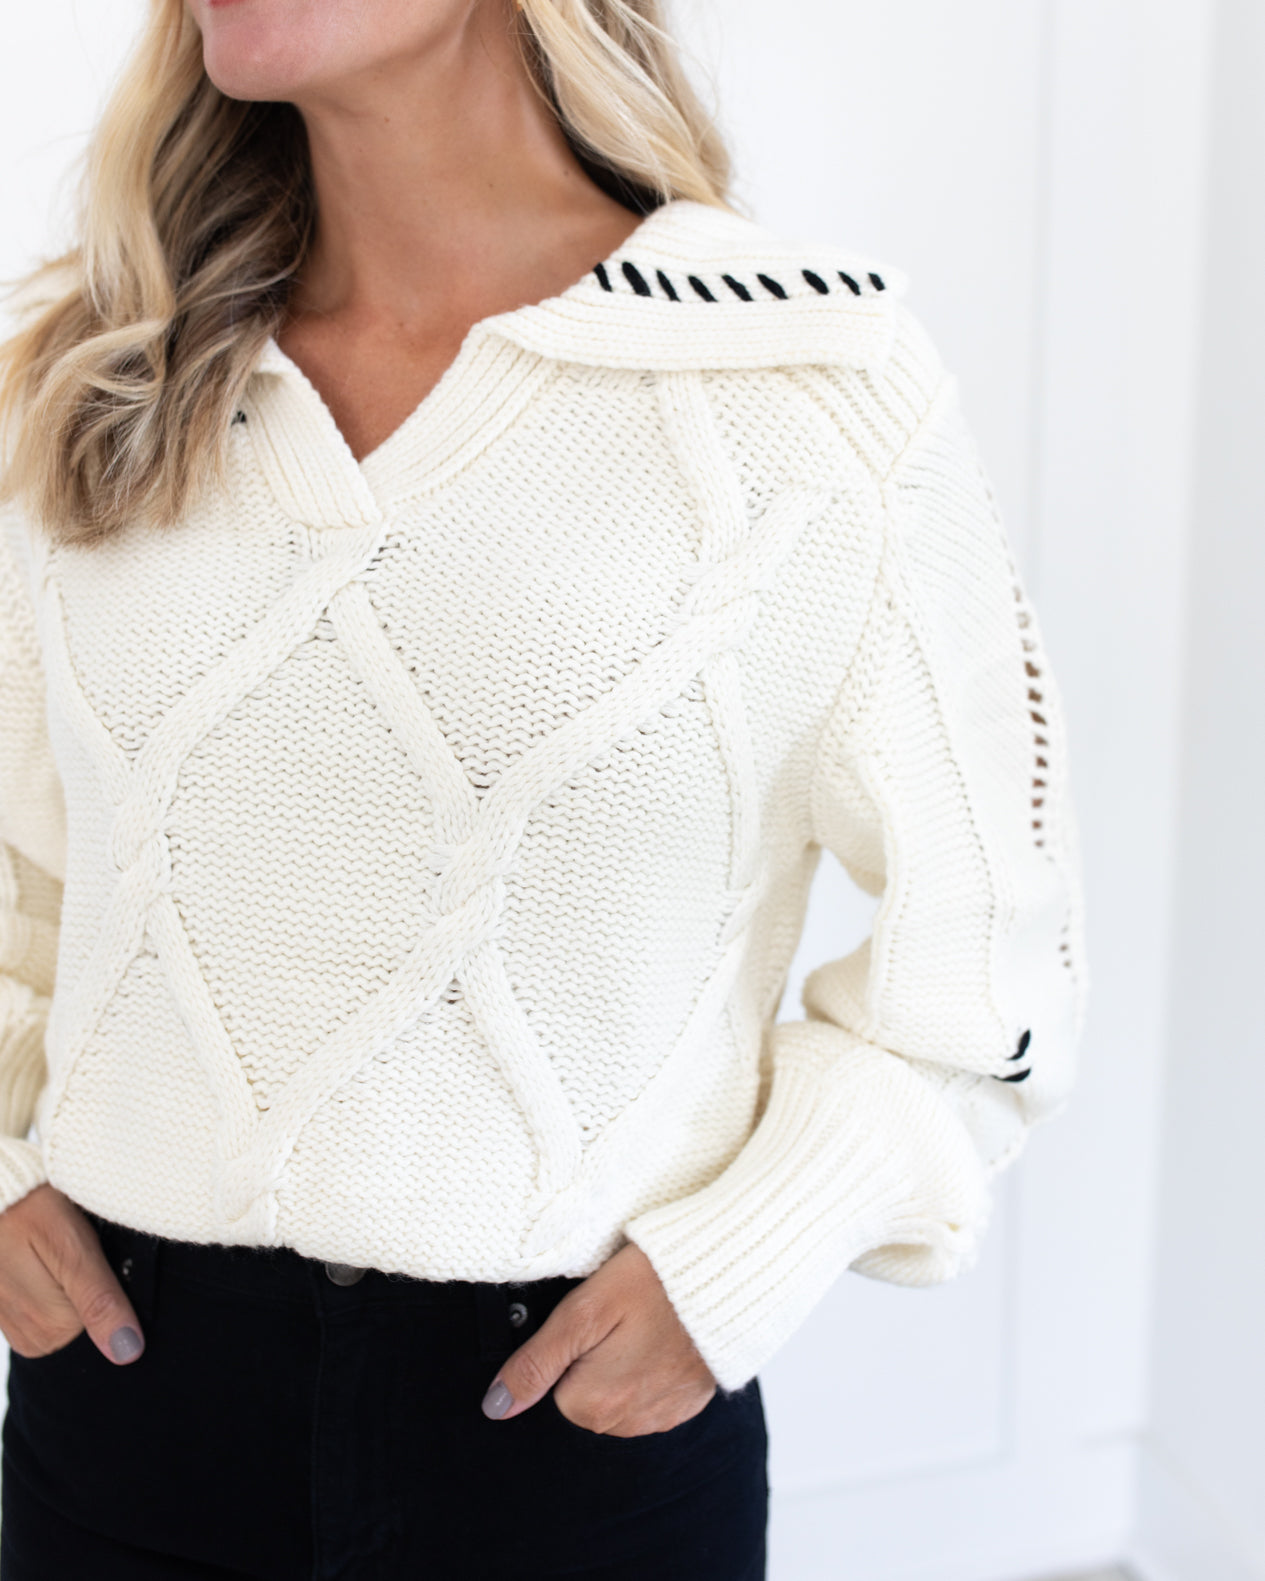 Ivory Cable Knit Sweater with black stitching